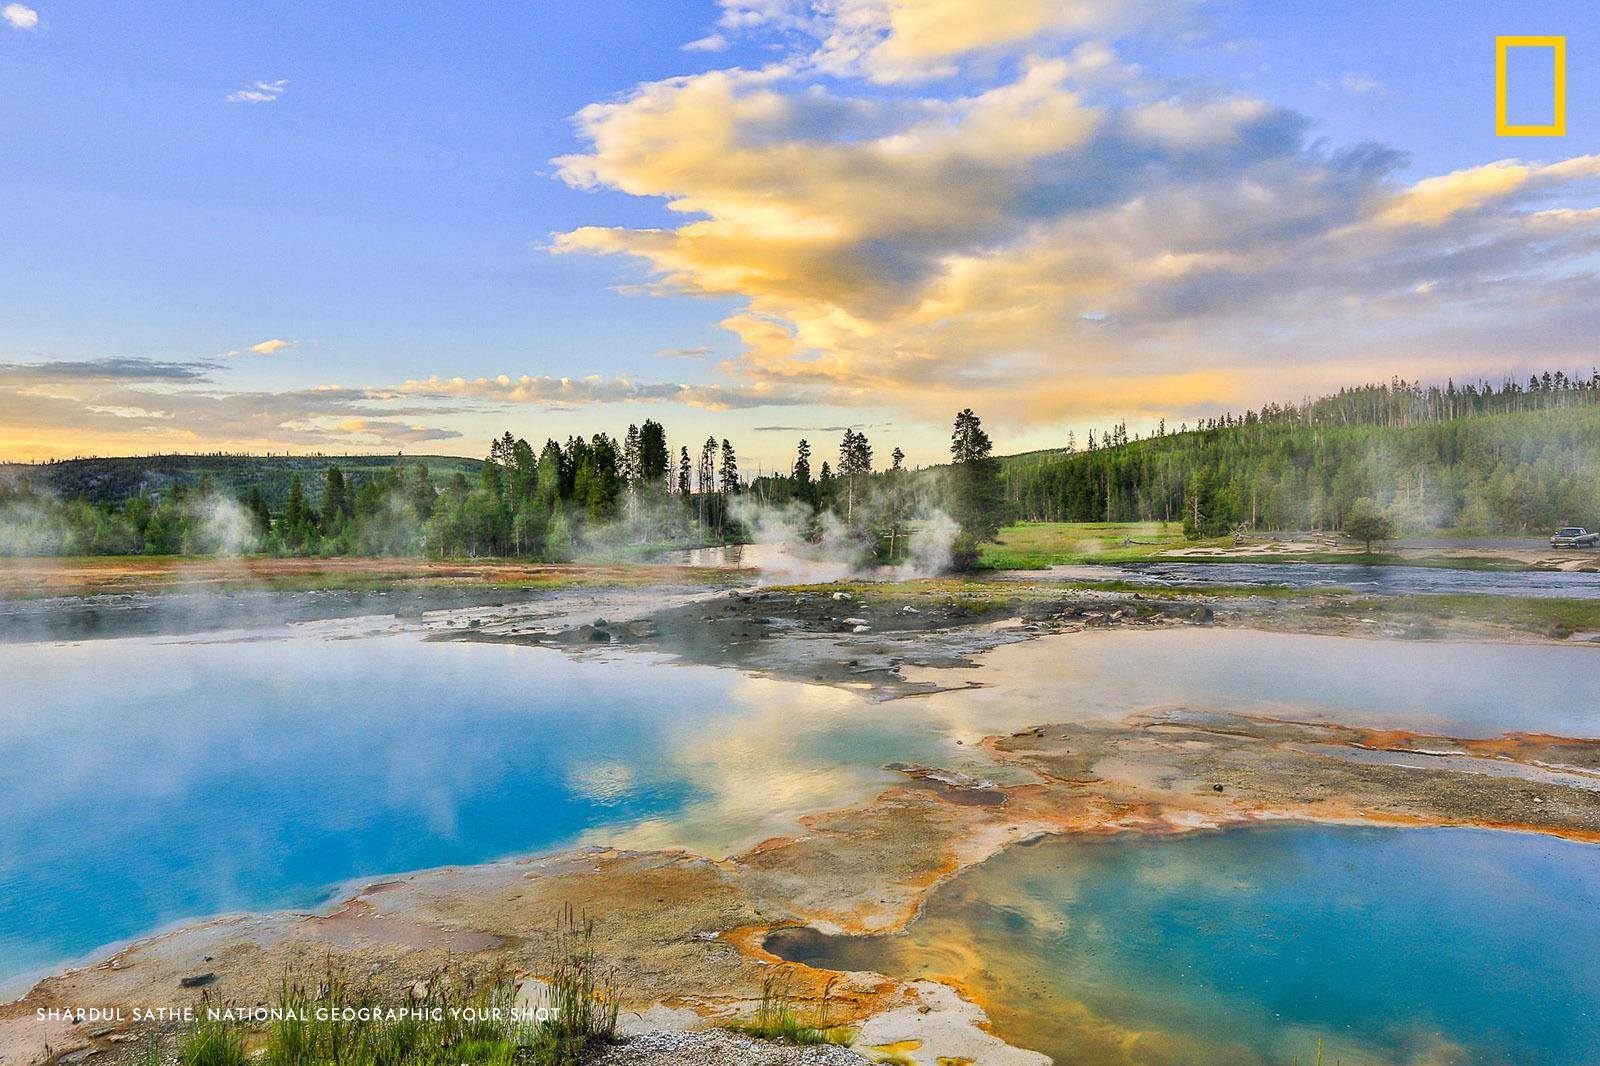 "Yellowstone—the most colorful national park I have seen," writes Your Shot photographer Shardul Sathe. "We arrived at this basin before sunset to watch the deep blue acidic pool and the magic of the golden hour." https://on.natgeo.com/2KtxPZW